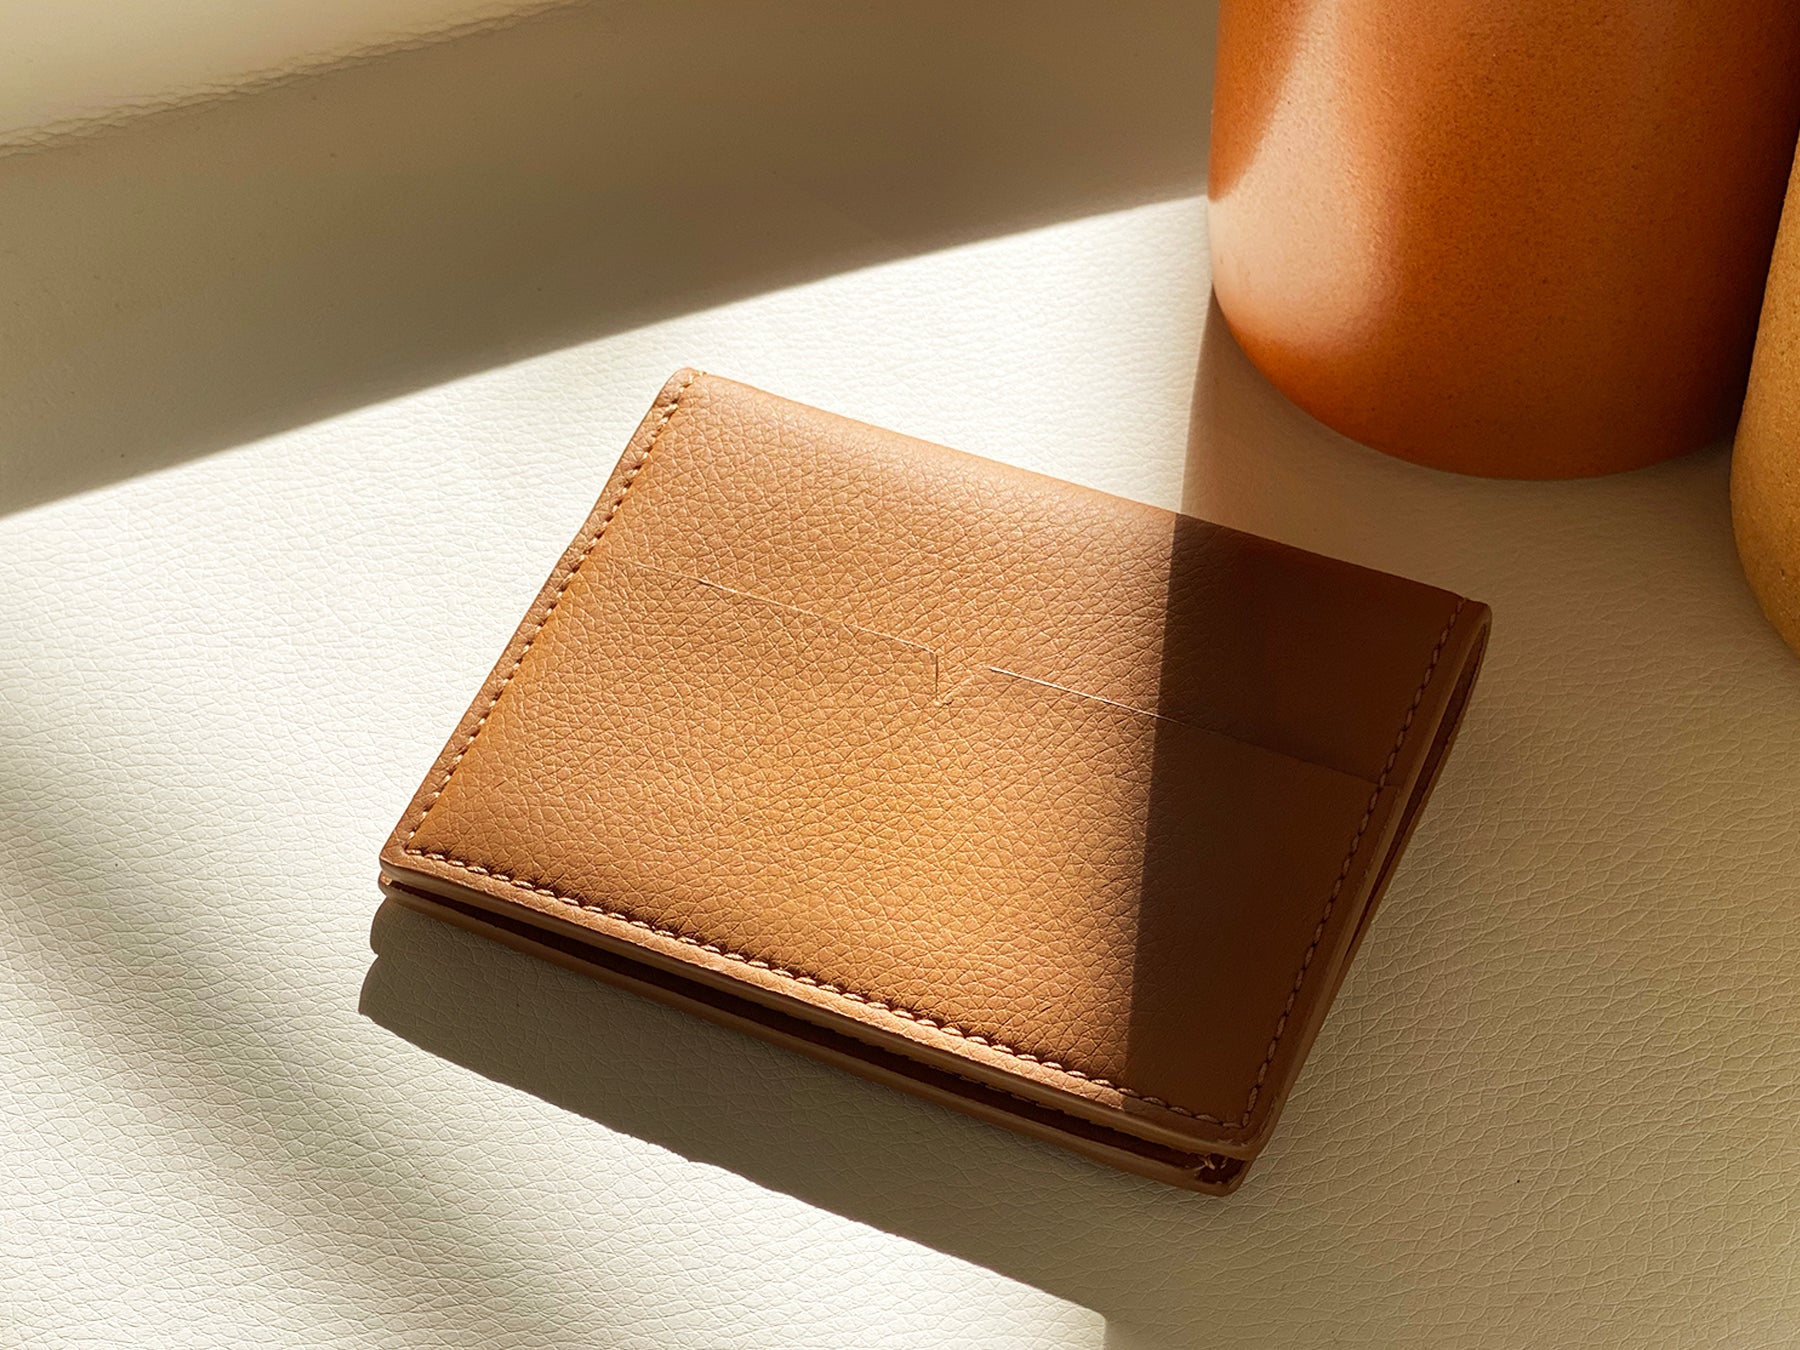 The Fold Wallet